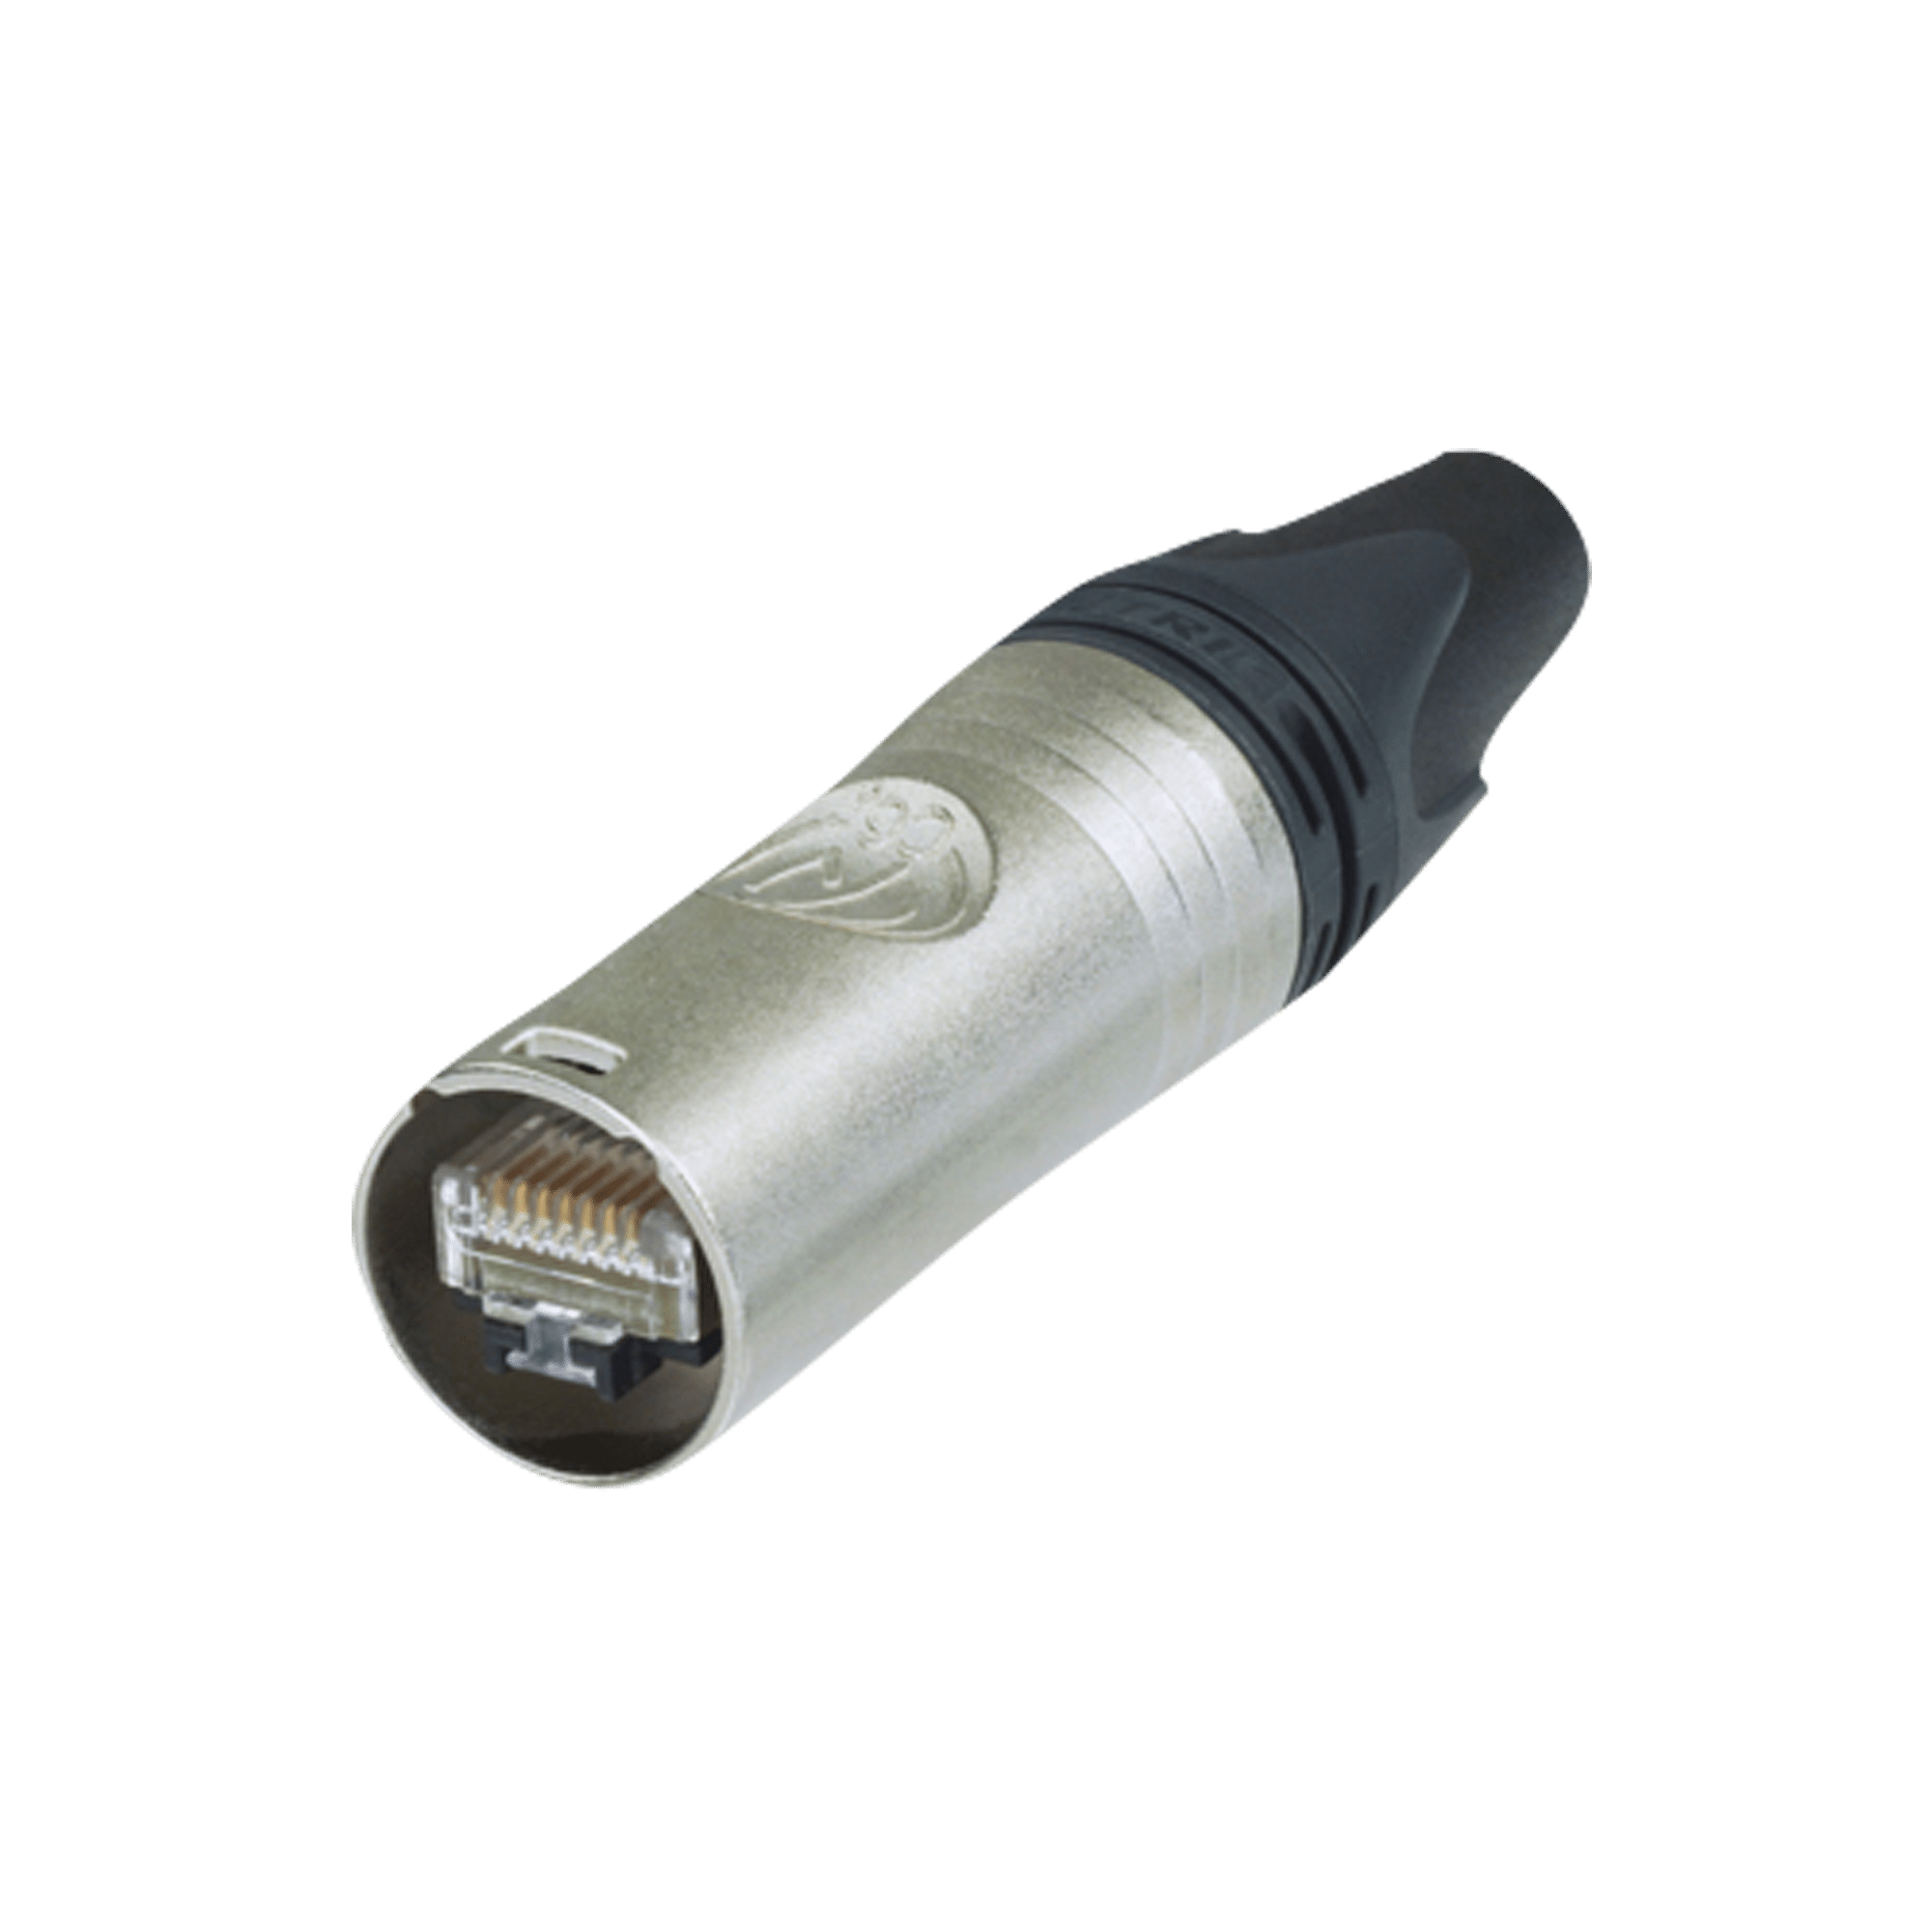 etherCON CAT6A Cable connector - Onlinediscowinkel.nl